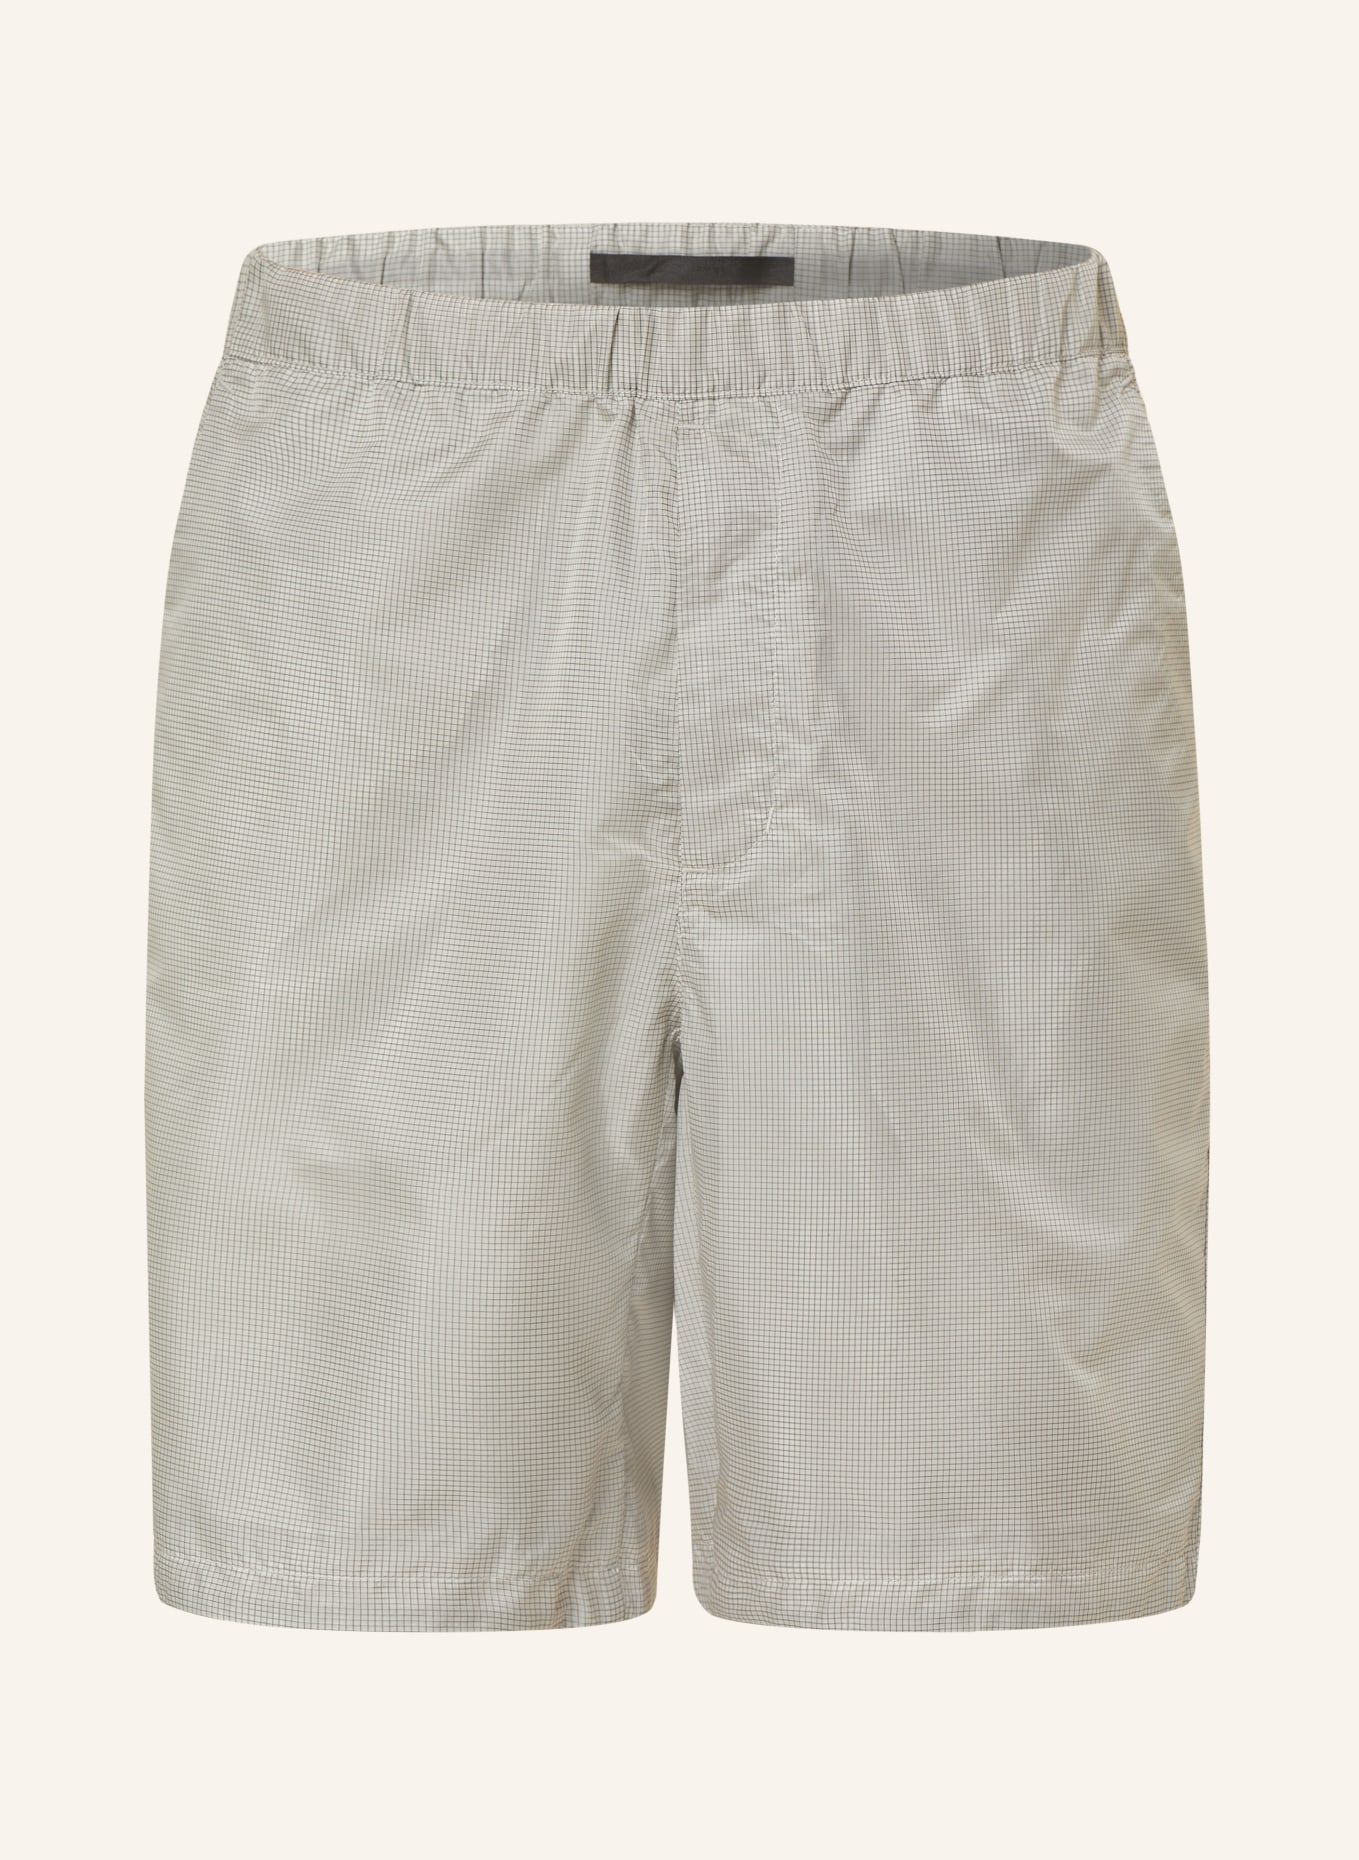 NORSE PROJECTS Shorts PASMO, Color: LIGHT GRAY/ BLUE GRAY (Image 1)